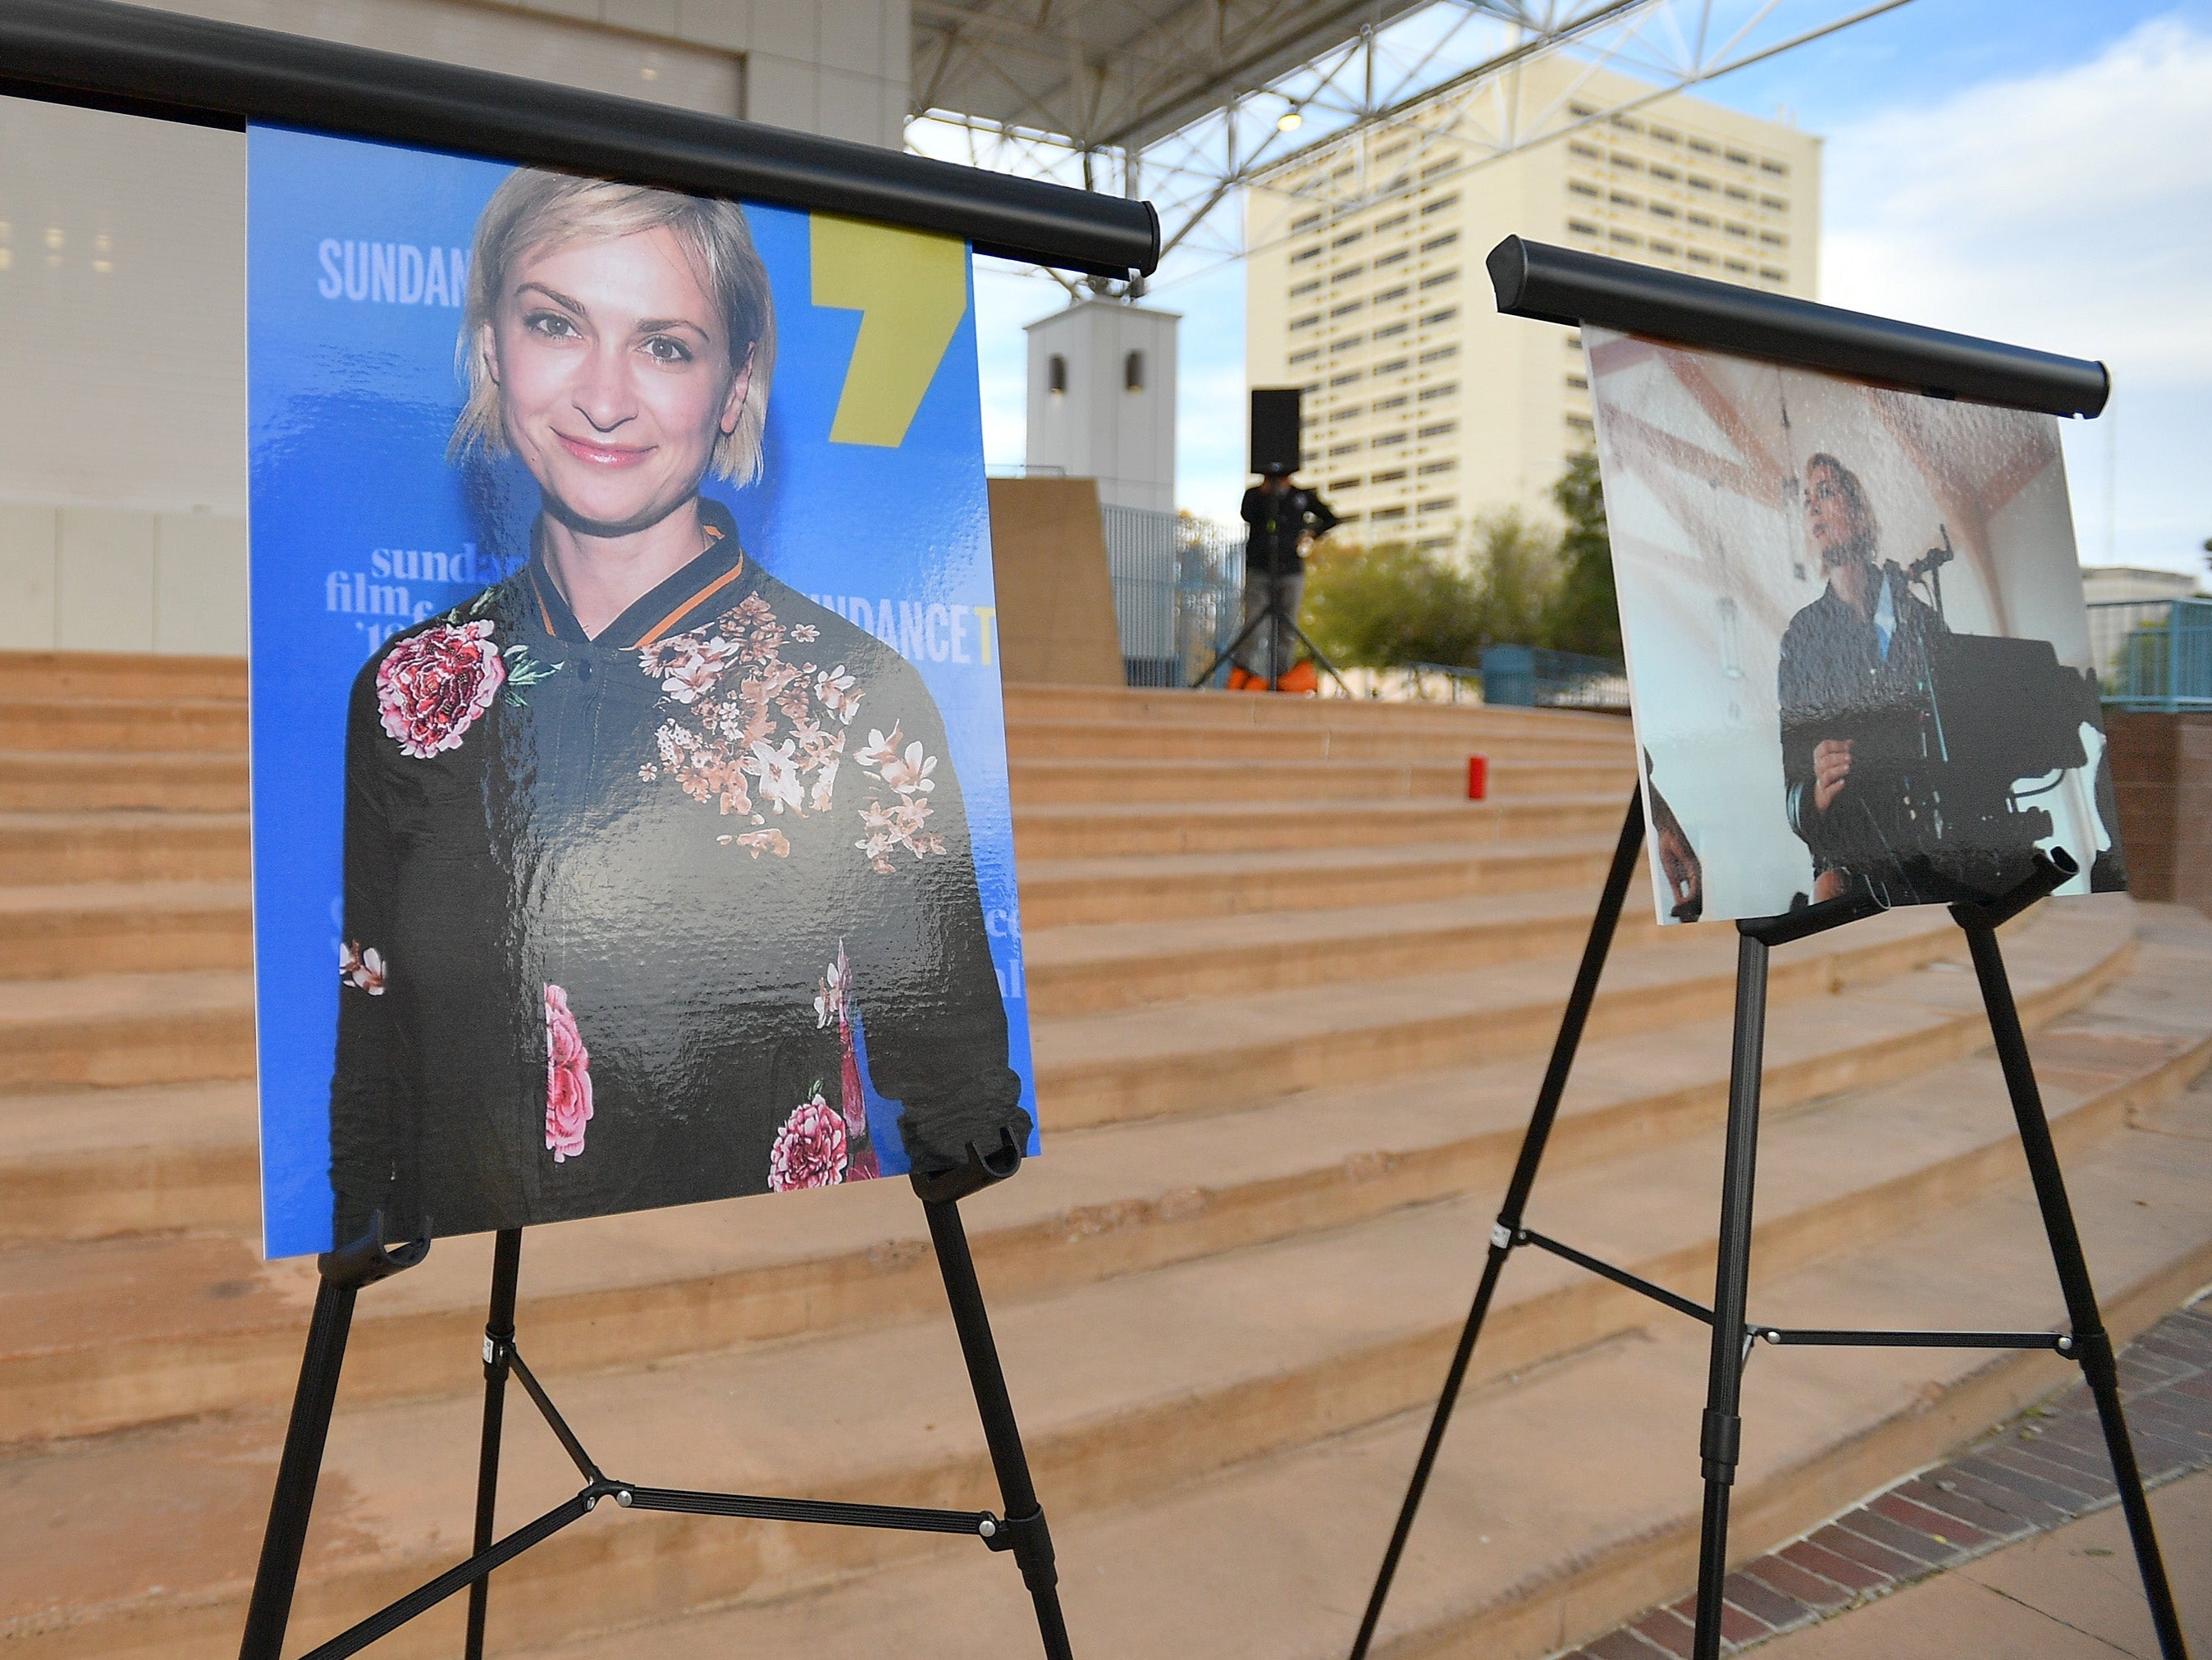 Photos of cinematographer Halyna Hutchins are displayed before a vigil held to honour her in New Mexico